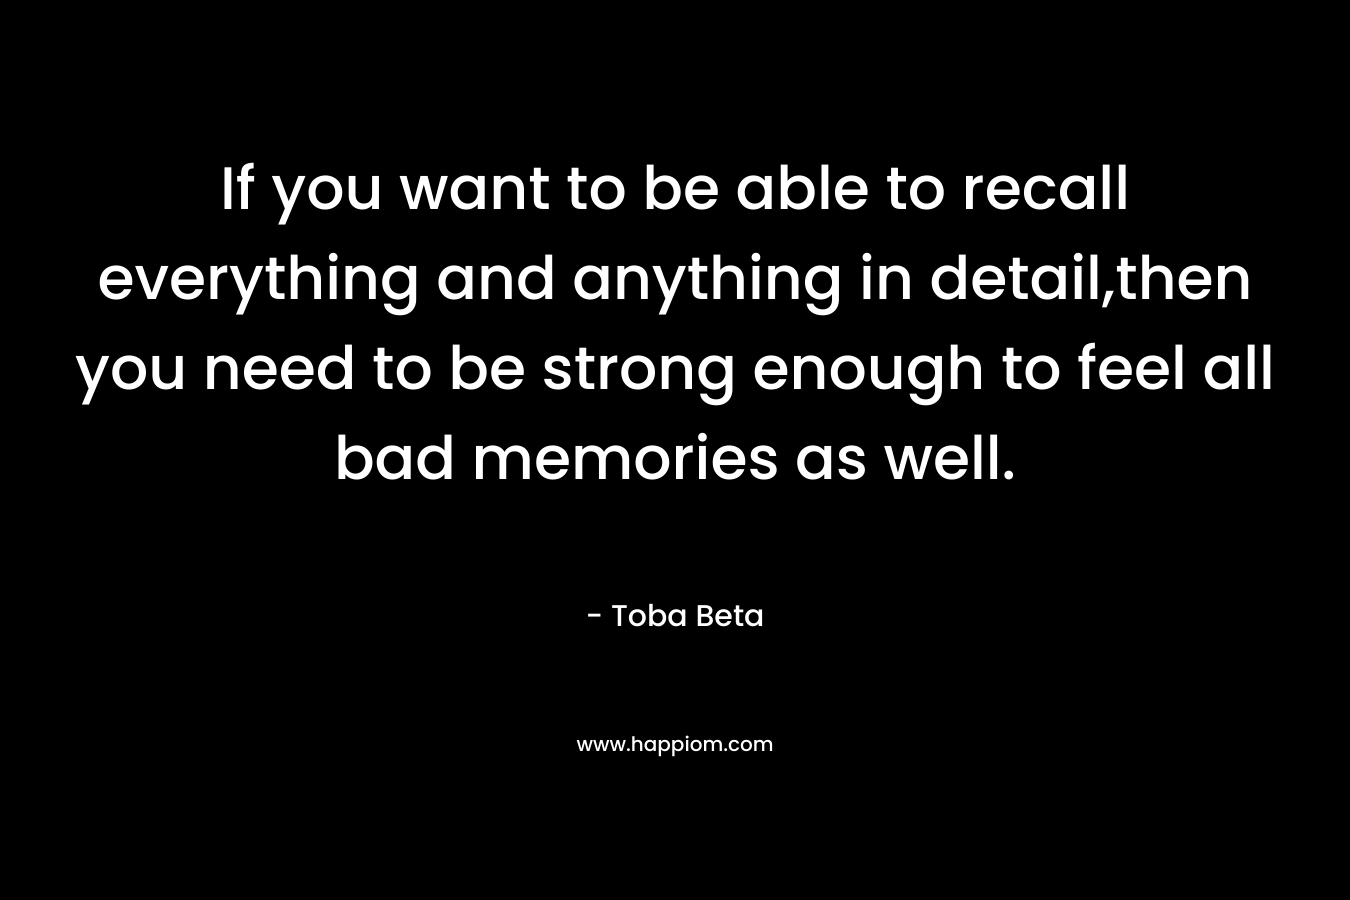 If you want to be able to recall everything and anything in detail,then you need to be strong enough to feel all bad memories as well.